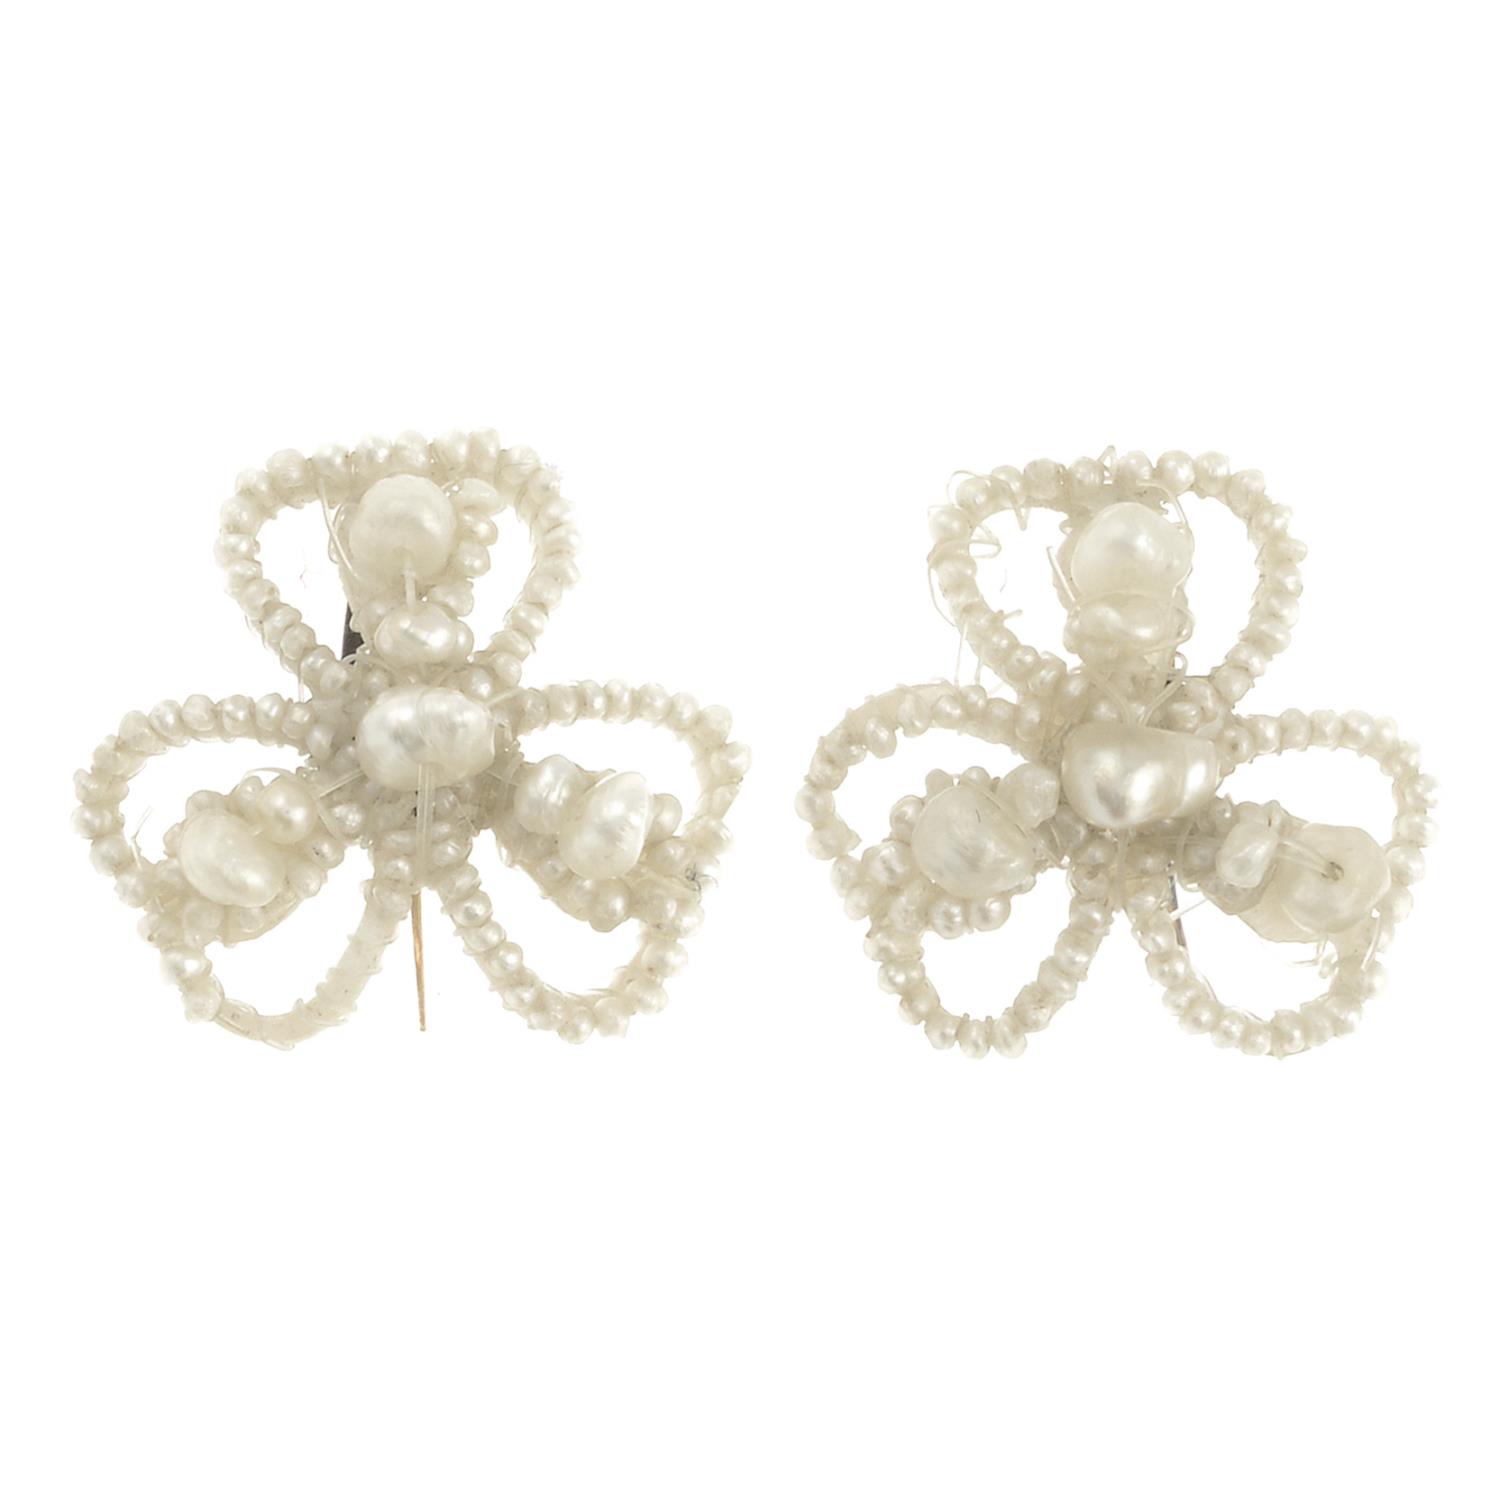 A pair of late 19th century seed and cultured pearl earrings depicting a shamrock,